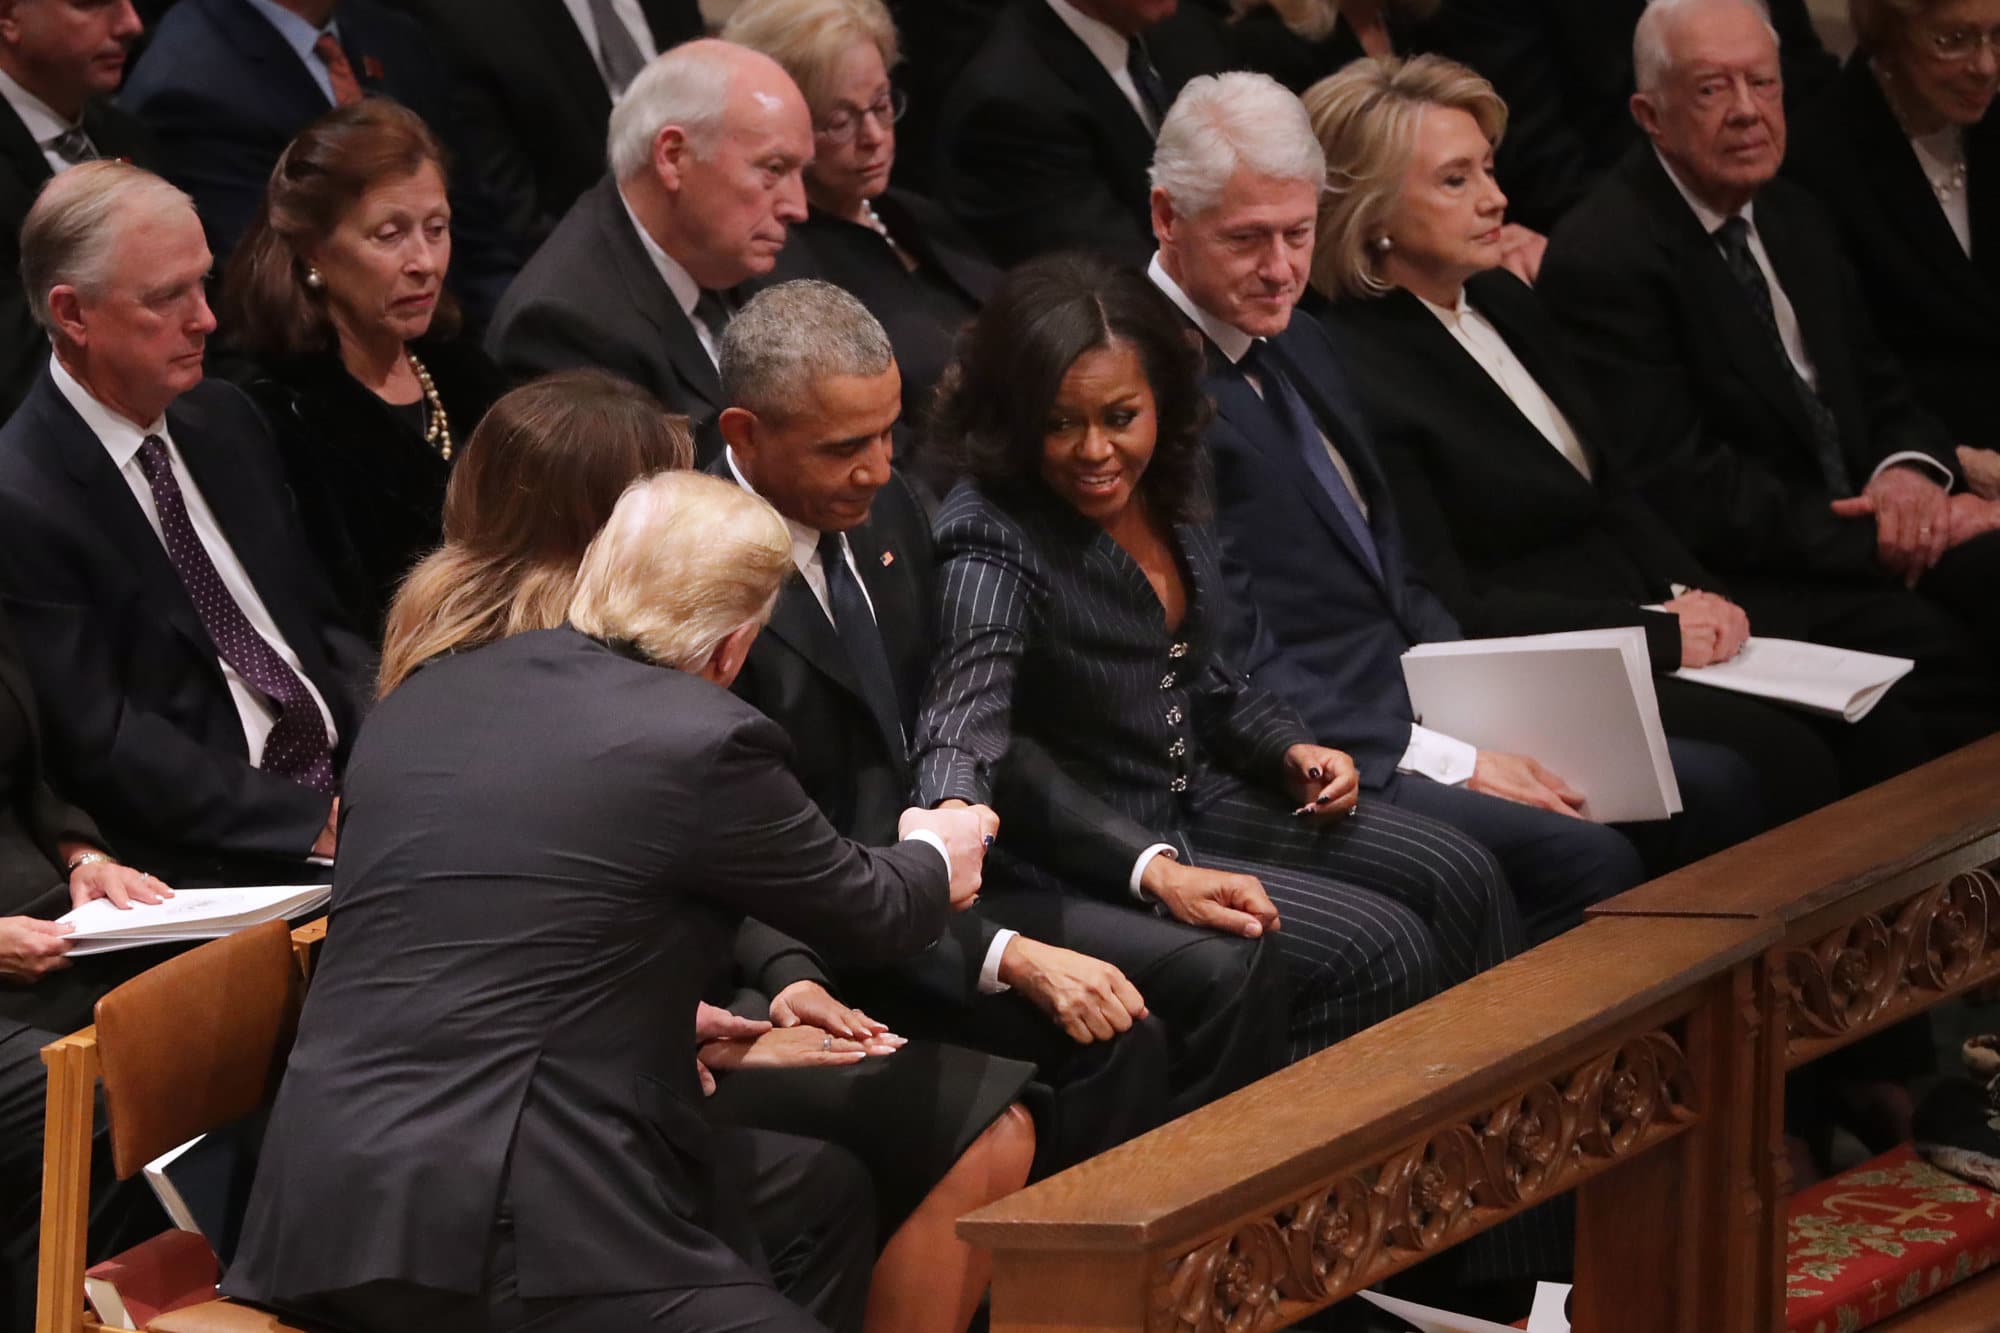 President Donald Trump and first lady Melania Trump greet former President Barack Obama and Michelle Obama as they join other former presidents and vice presidents and their spouses for the state funeral for former President George H.W. Bush at the National Cathedral December 05, 2018 in Washington, DC. A WWII combat veteran, Bush served as a member of Congress from Texas, ambassador to the United Nations, director of the CIA, vice president and 41st president of the United States.  (Photo by Chip Somodevilla/Getty Images)